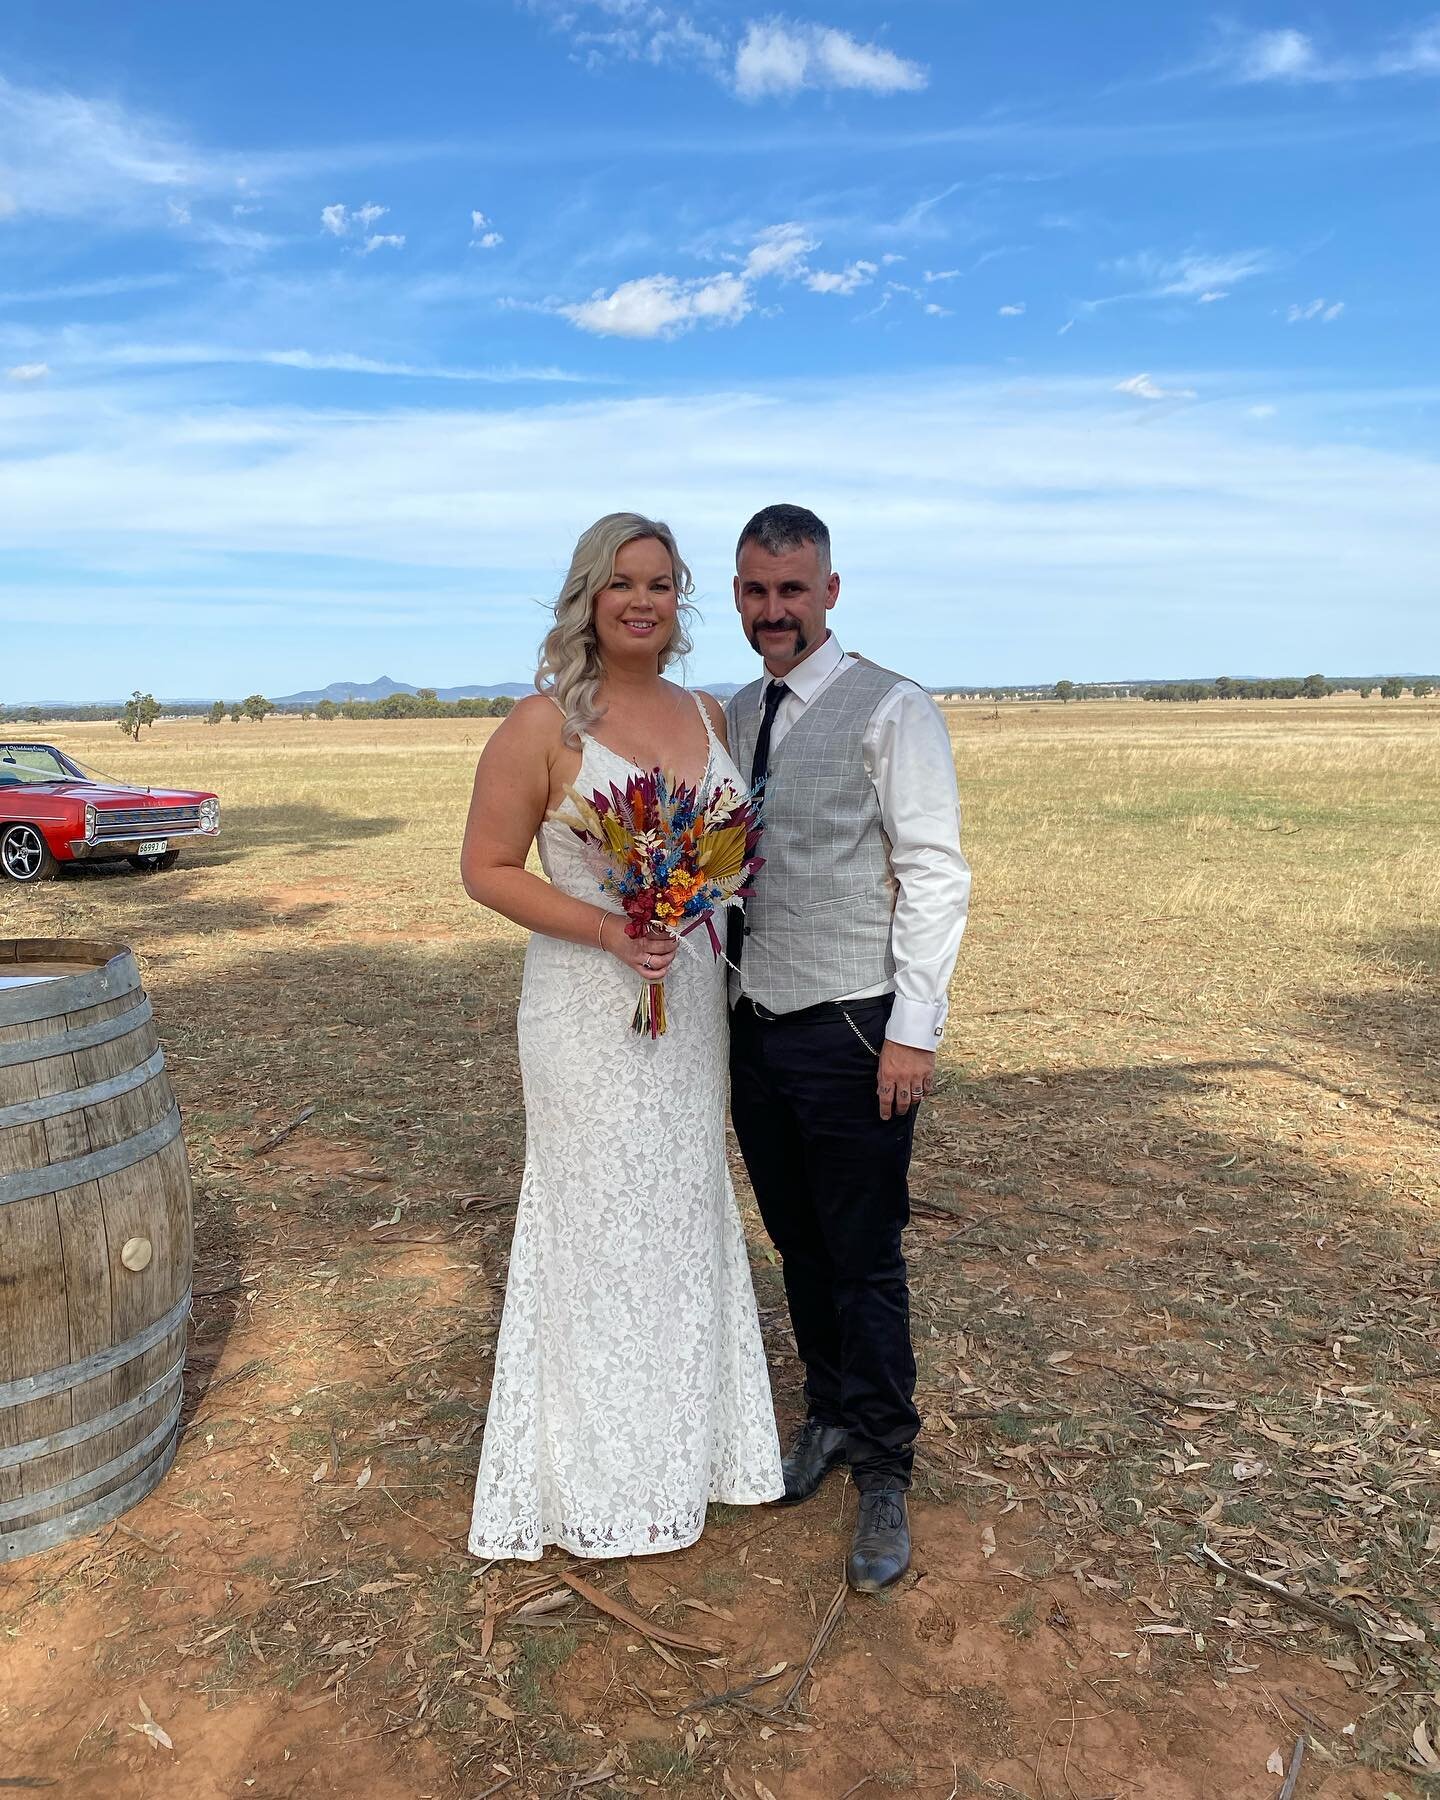 Gorgeous ELLA &amp; MATT. Saturday was the most perfect day for a wedding on Ella&rsquo;s family farm. A huge Congratulations to MR &amp; MRS EDWARDS #janetschirmermarriagecelebrant #janetschirmerweddingcelebrant #celebrant #waggacelebrant #riverinac